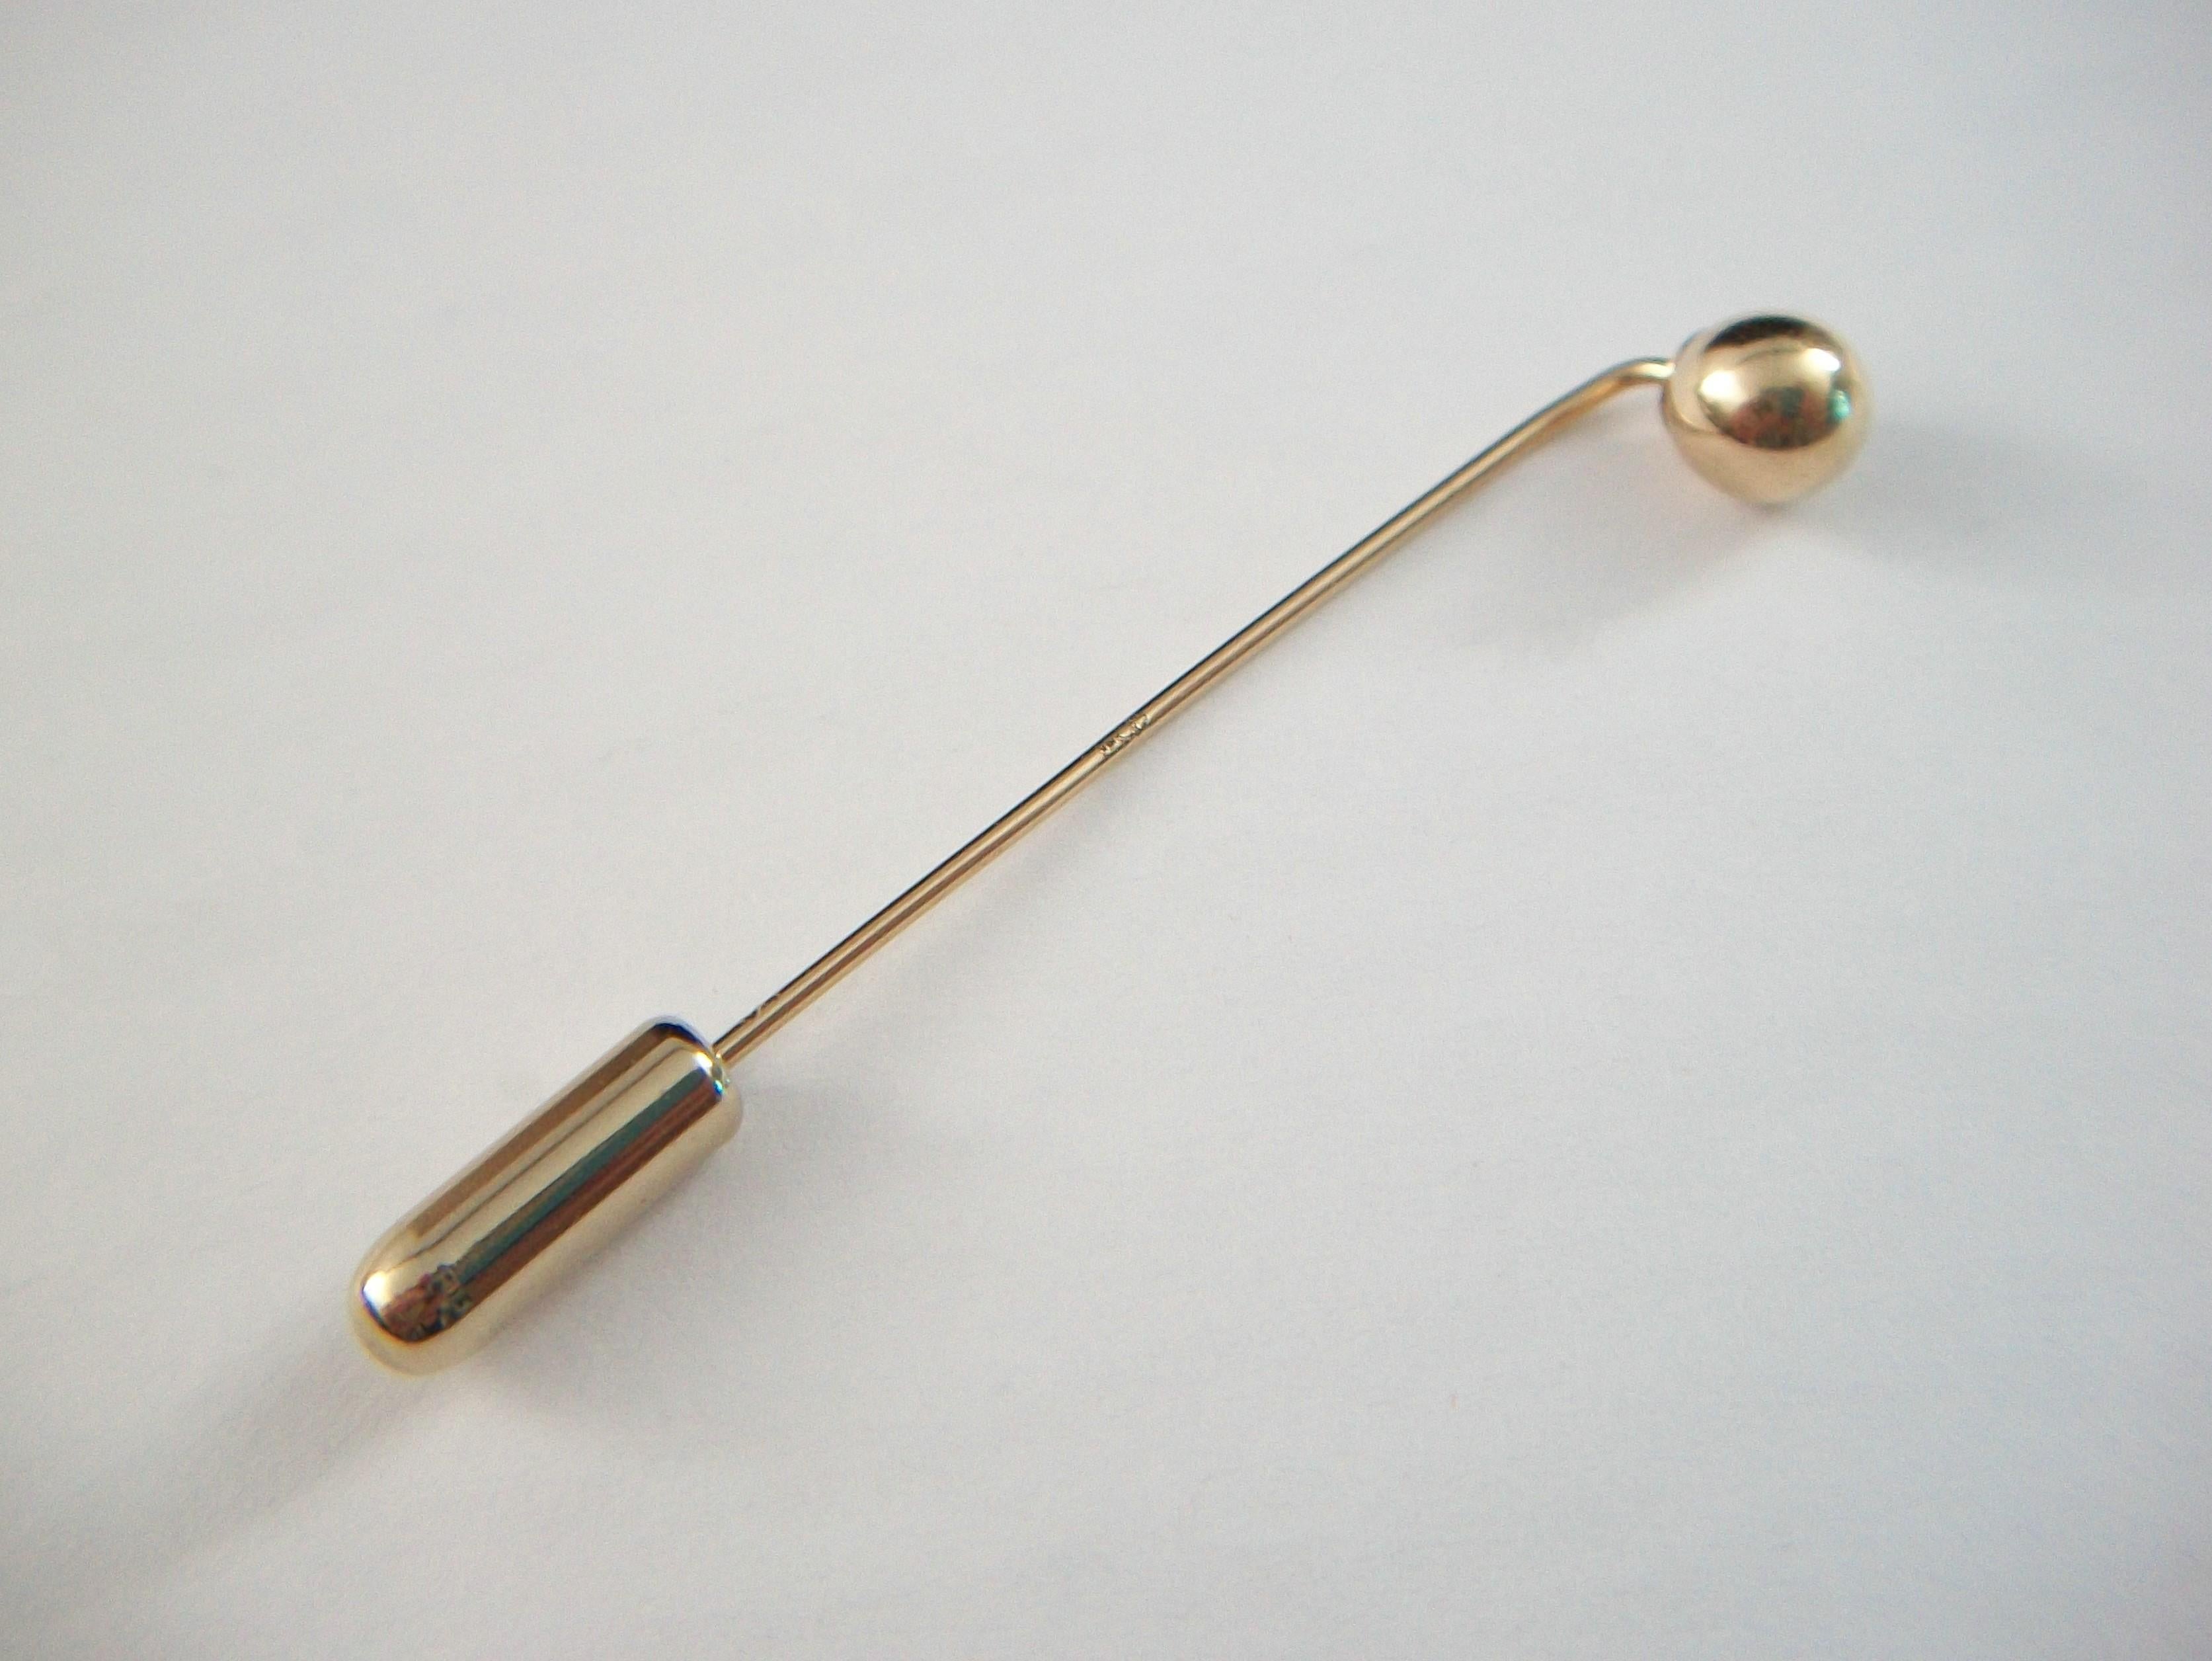 Modernist Vintage 10K Gold Ball Stick Pin - United States - Circa 1980's For Sale